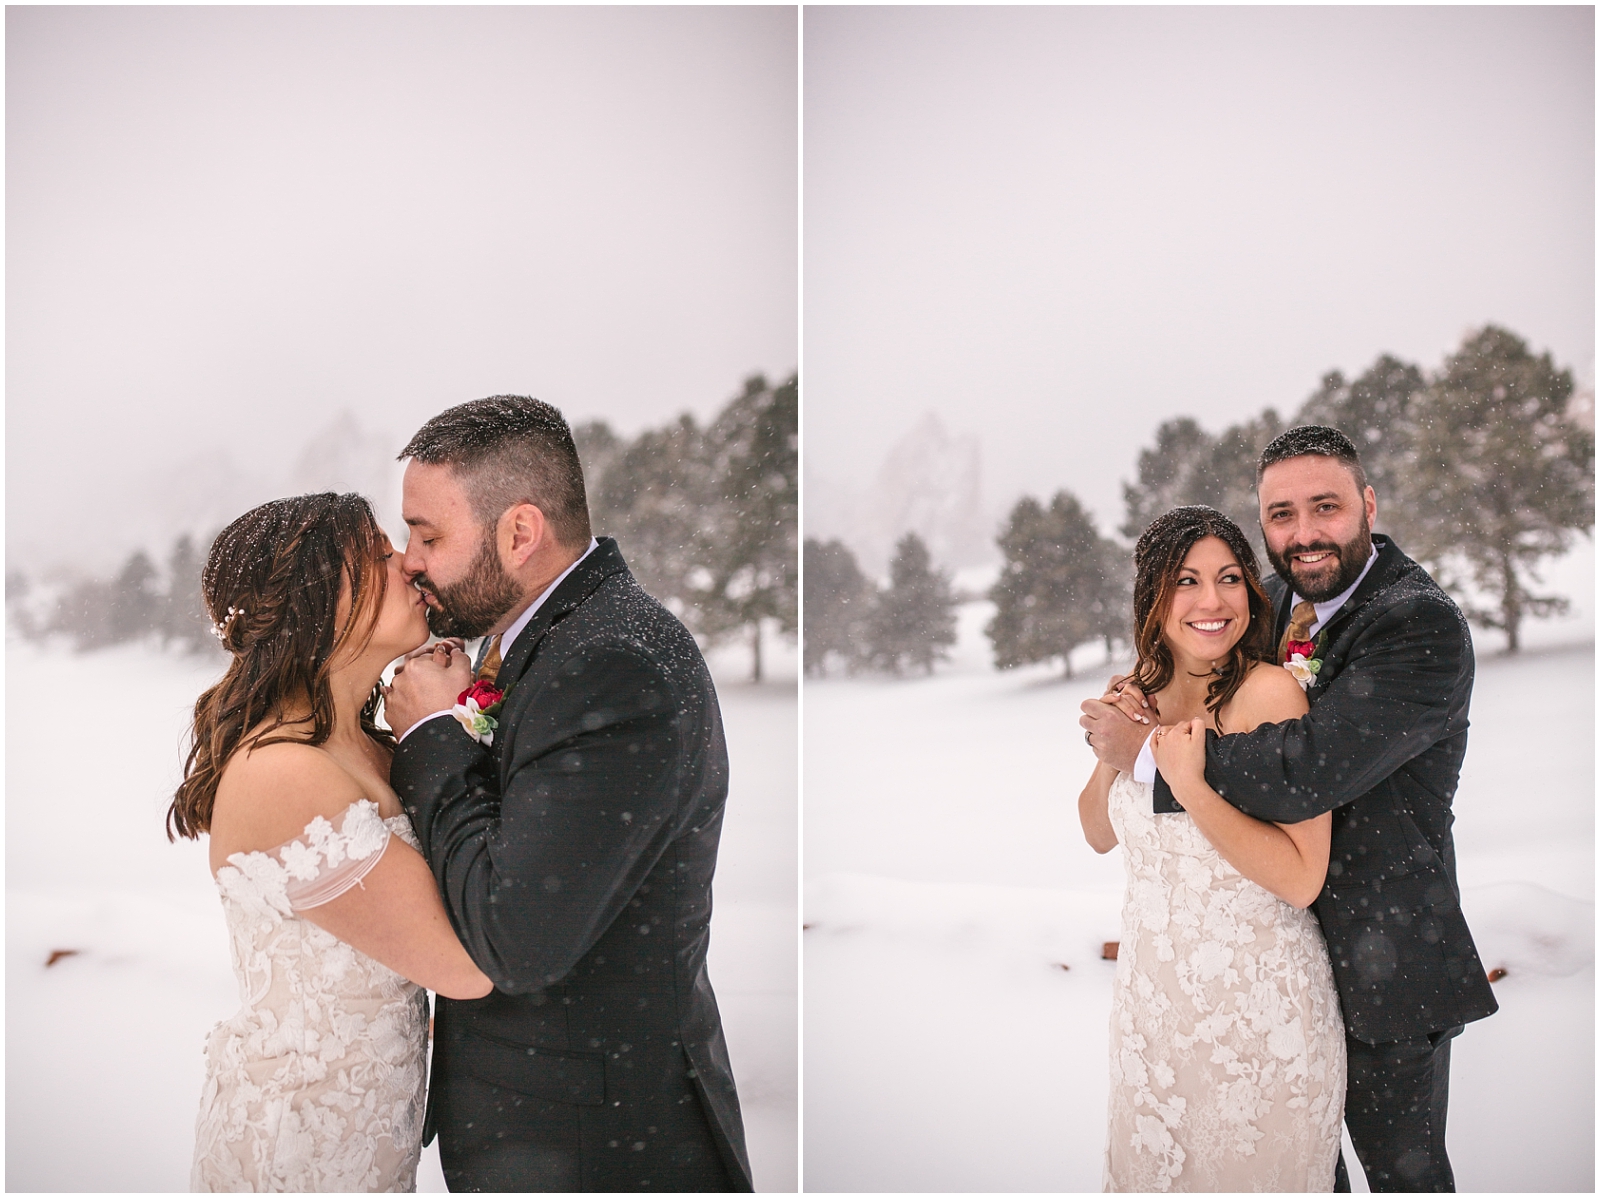 Bride and groom cuddling in the snow storm for their winter wedding at Arrowhead Golf Club